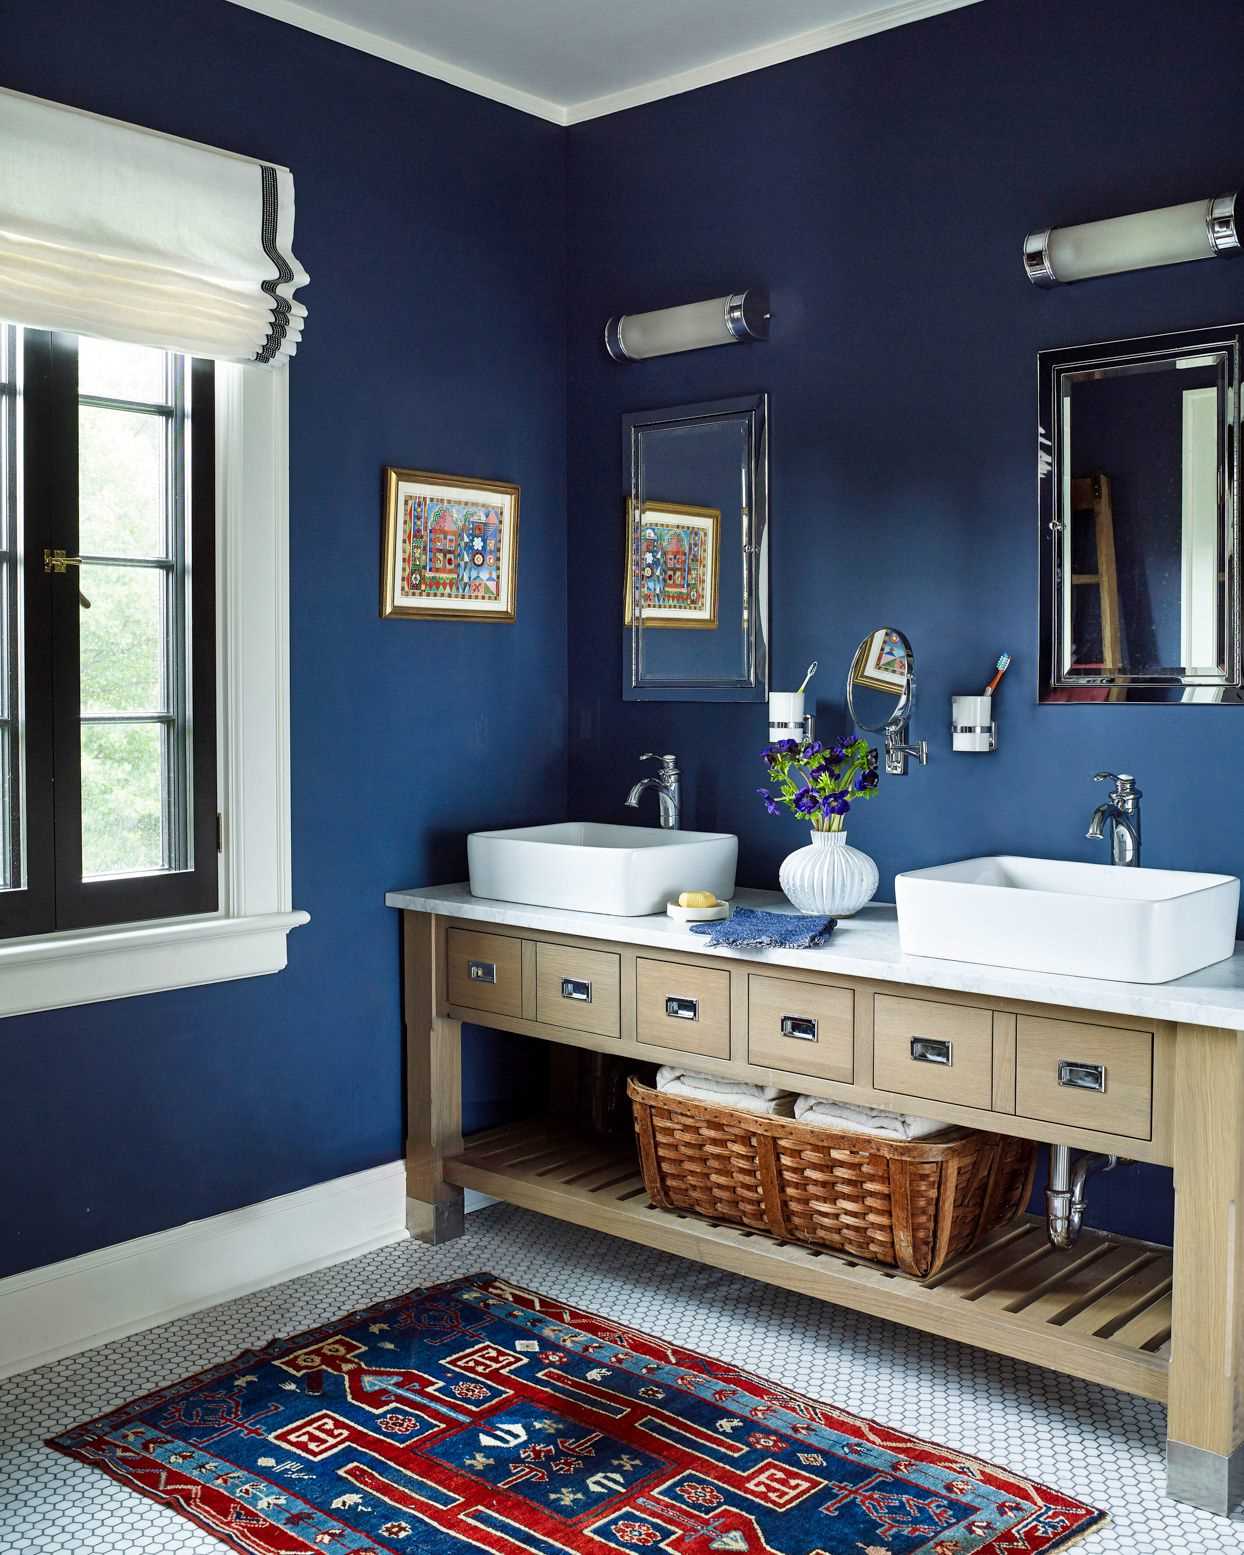 Why Navy Blue and Black Work Well Together